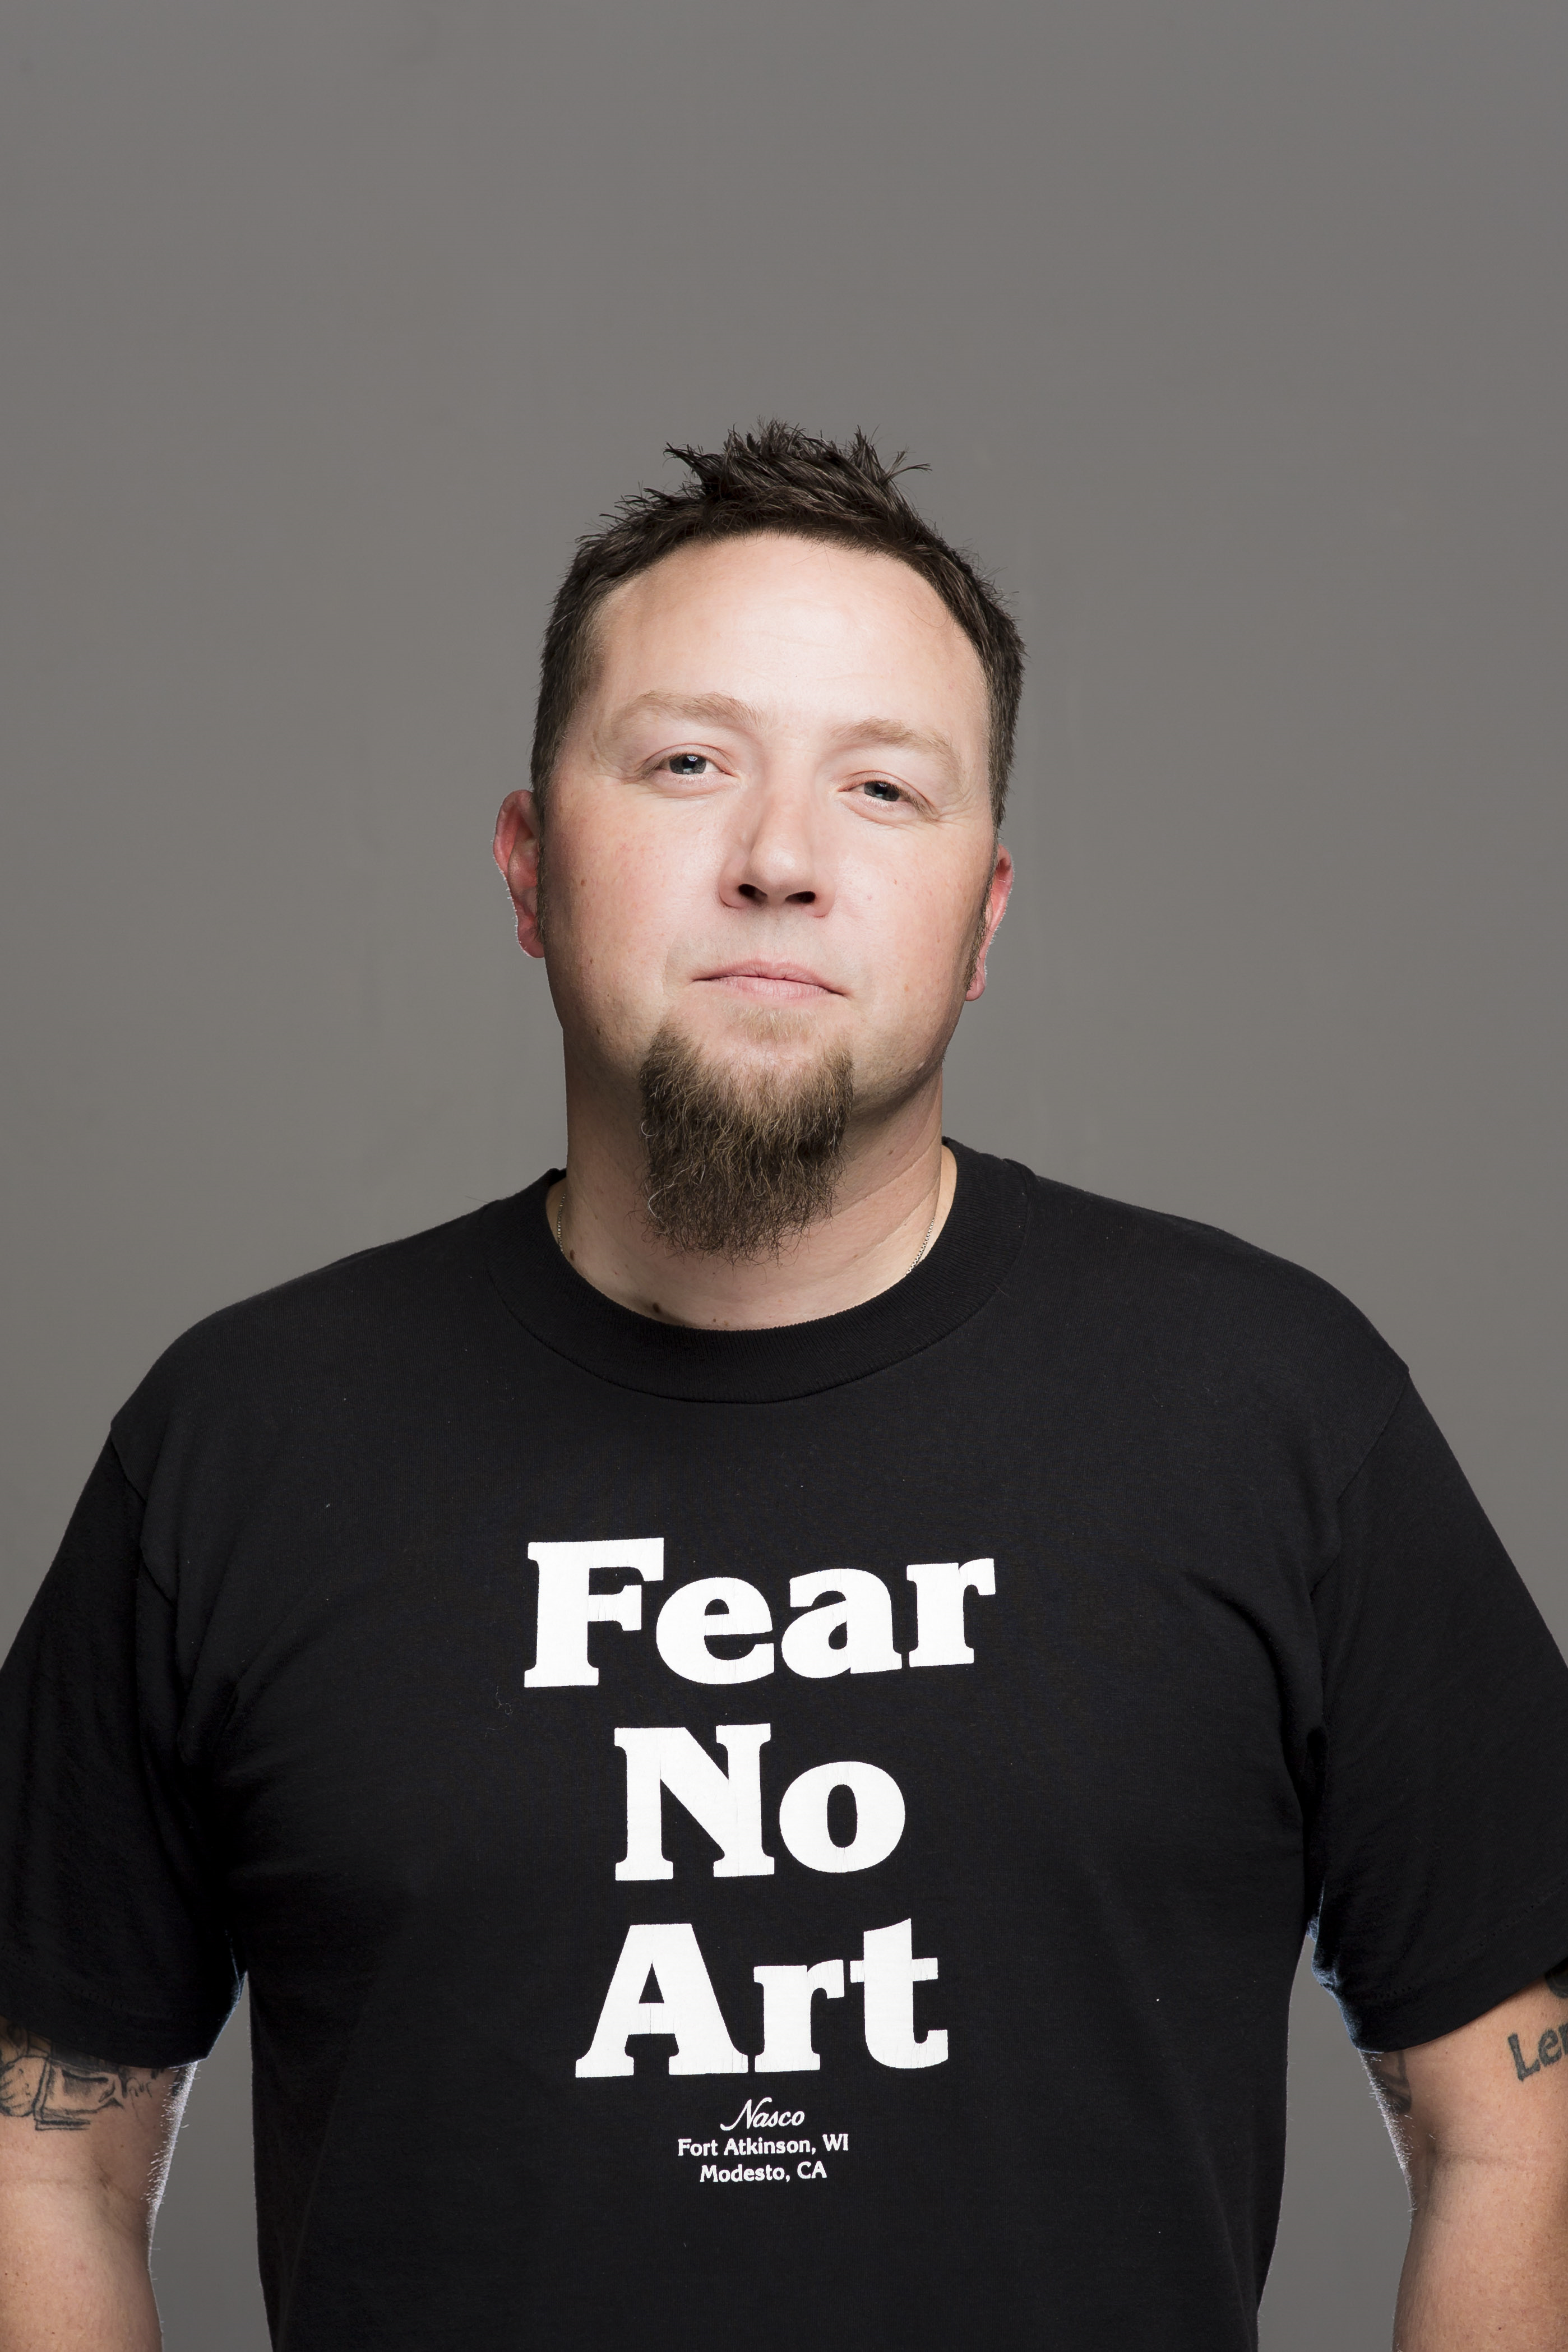 Image from the waist up of Ray McManus wearing a black t-shirt with the words "Fear No Art" across the front in white letters.